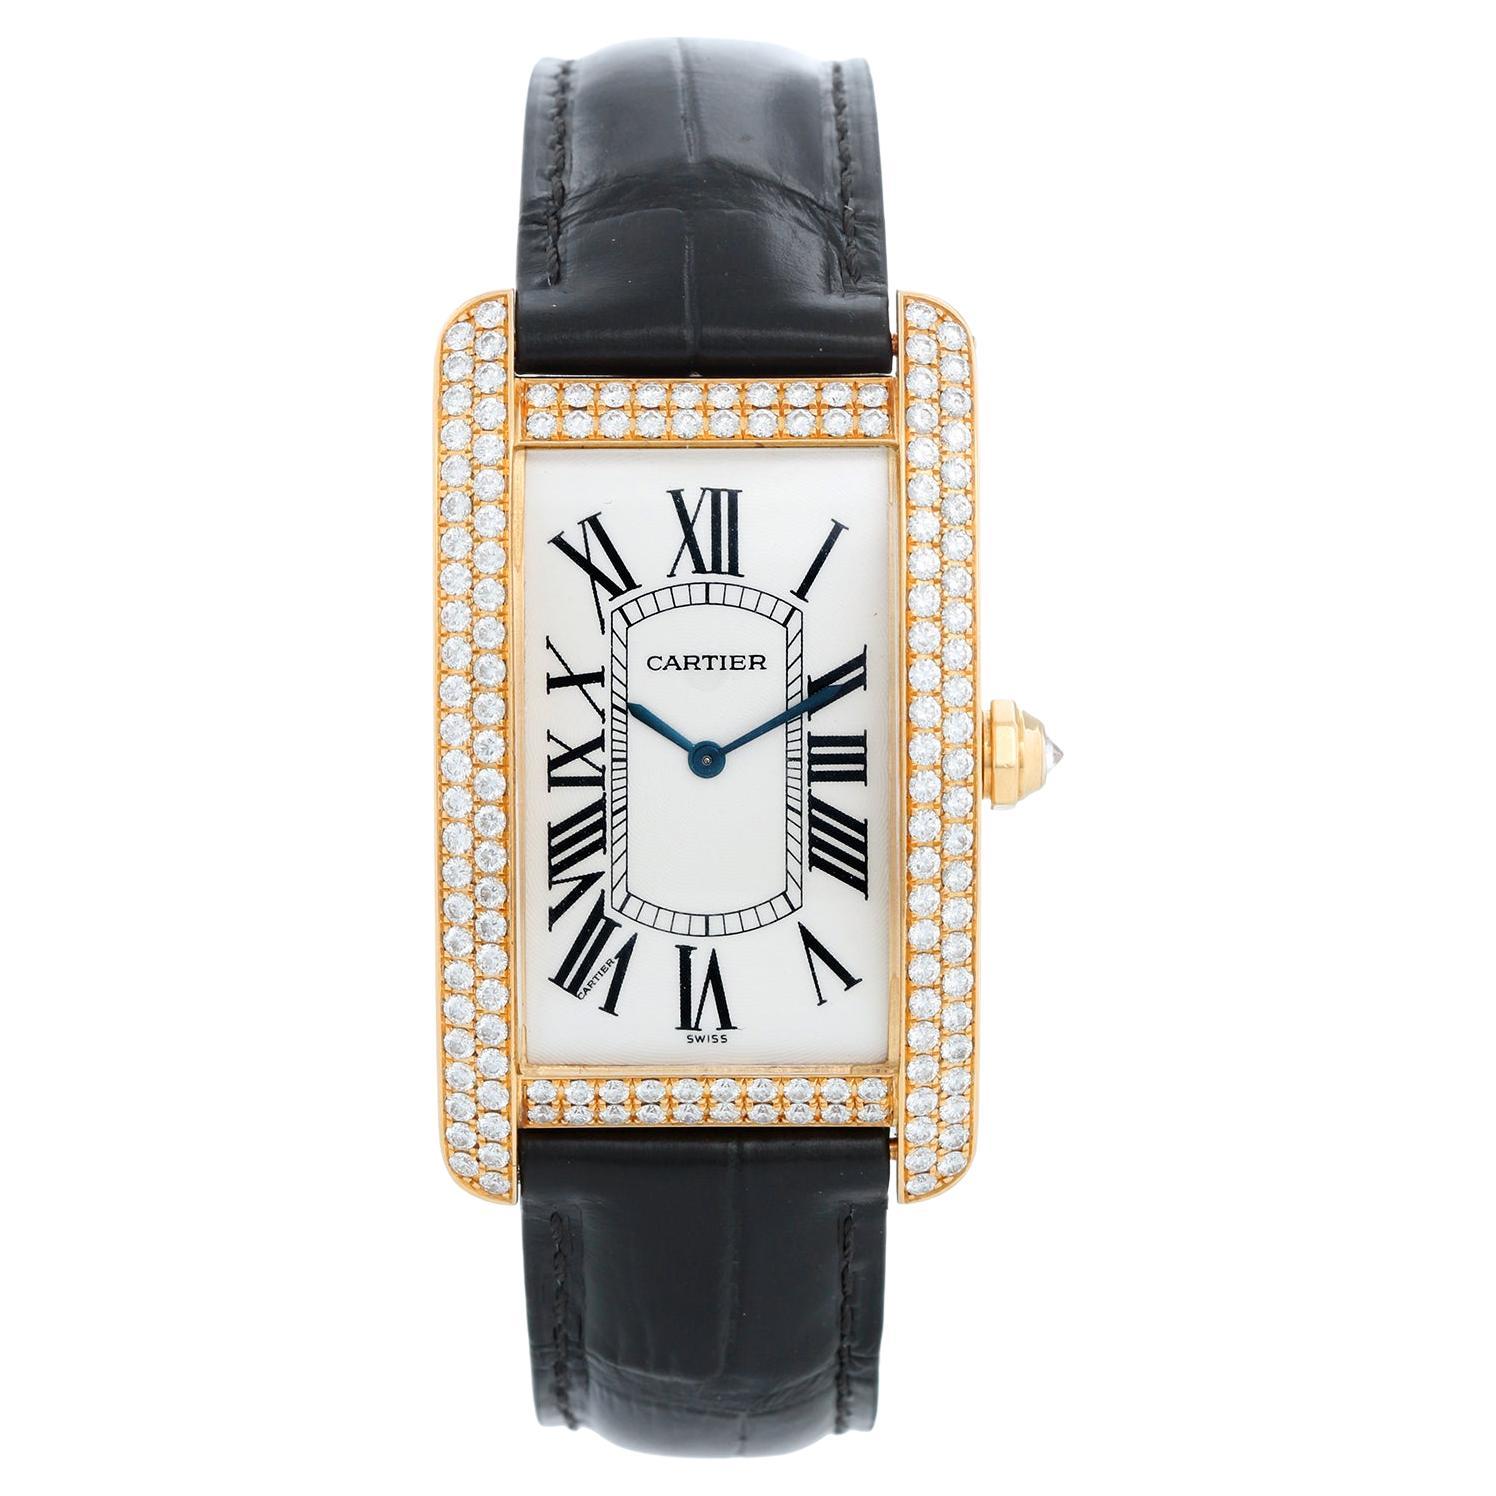 Cartier Tank Americaine Large 18k Yellow Gold & Diamond Watch Ref 1735 For Sale